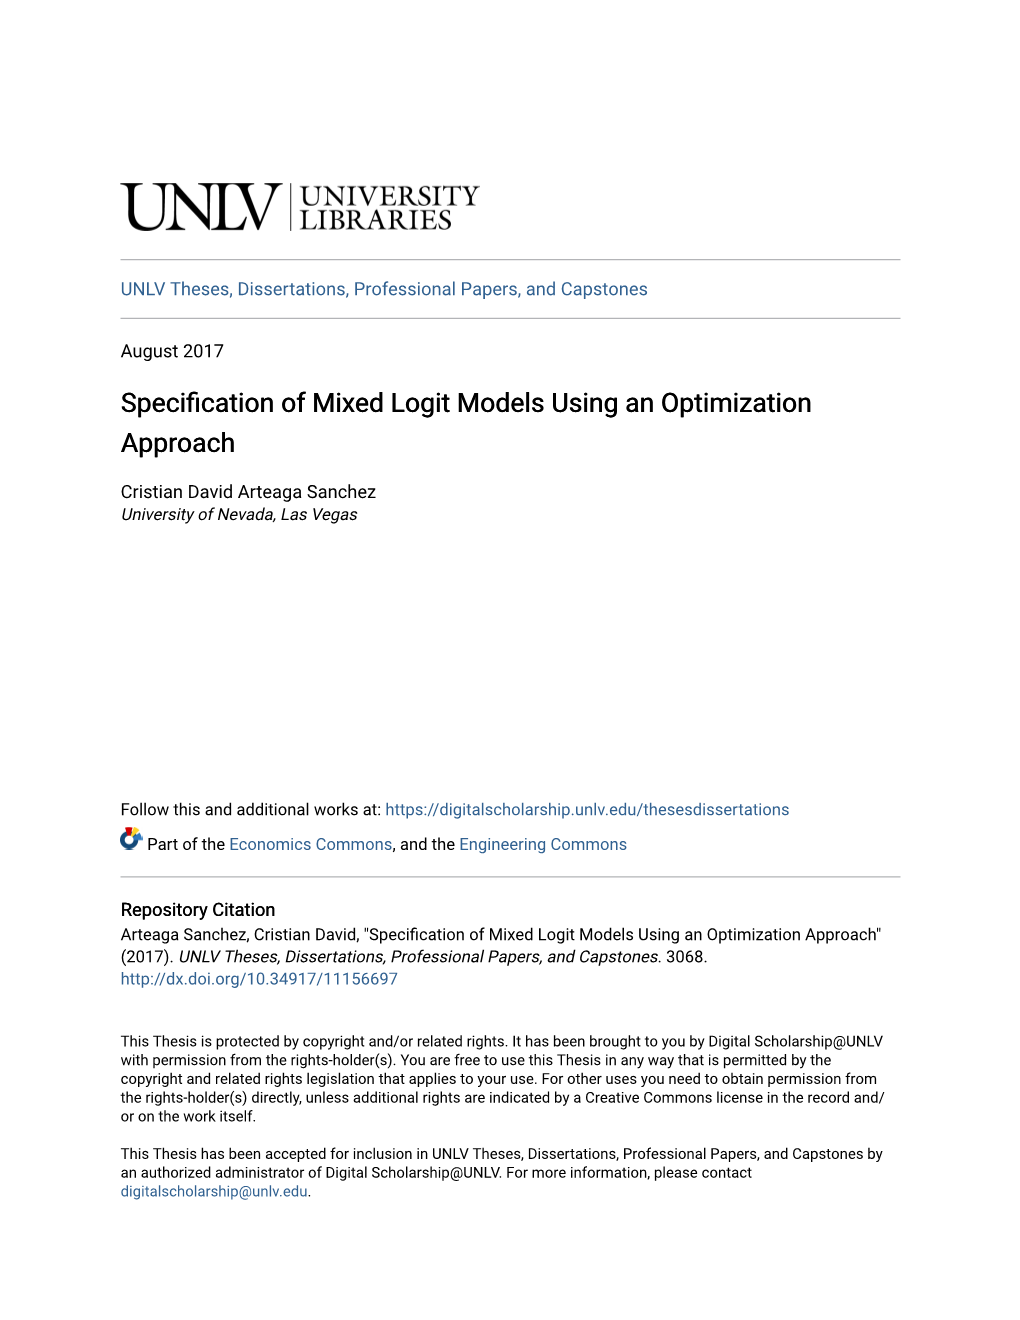 Specification of Mixed Logit Models Using an Optimization Approach